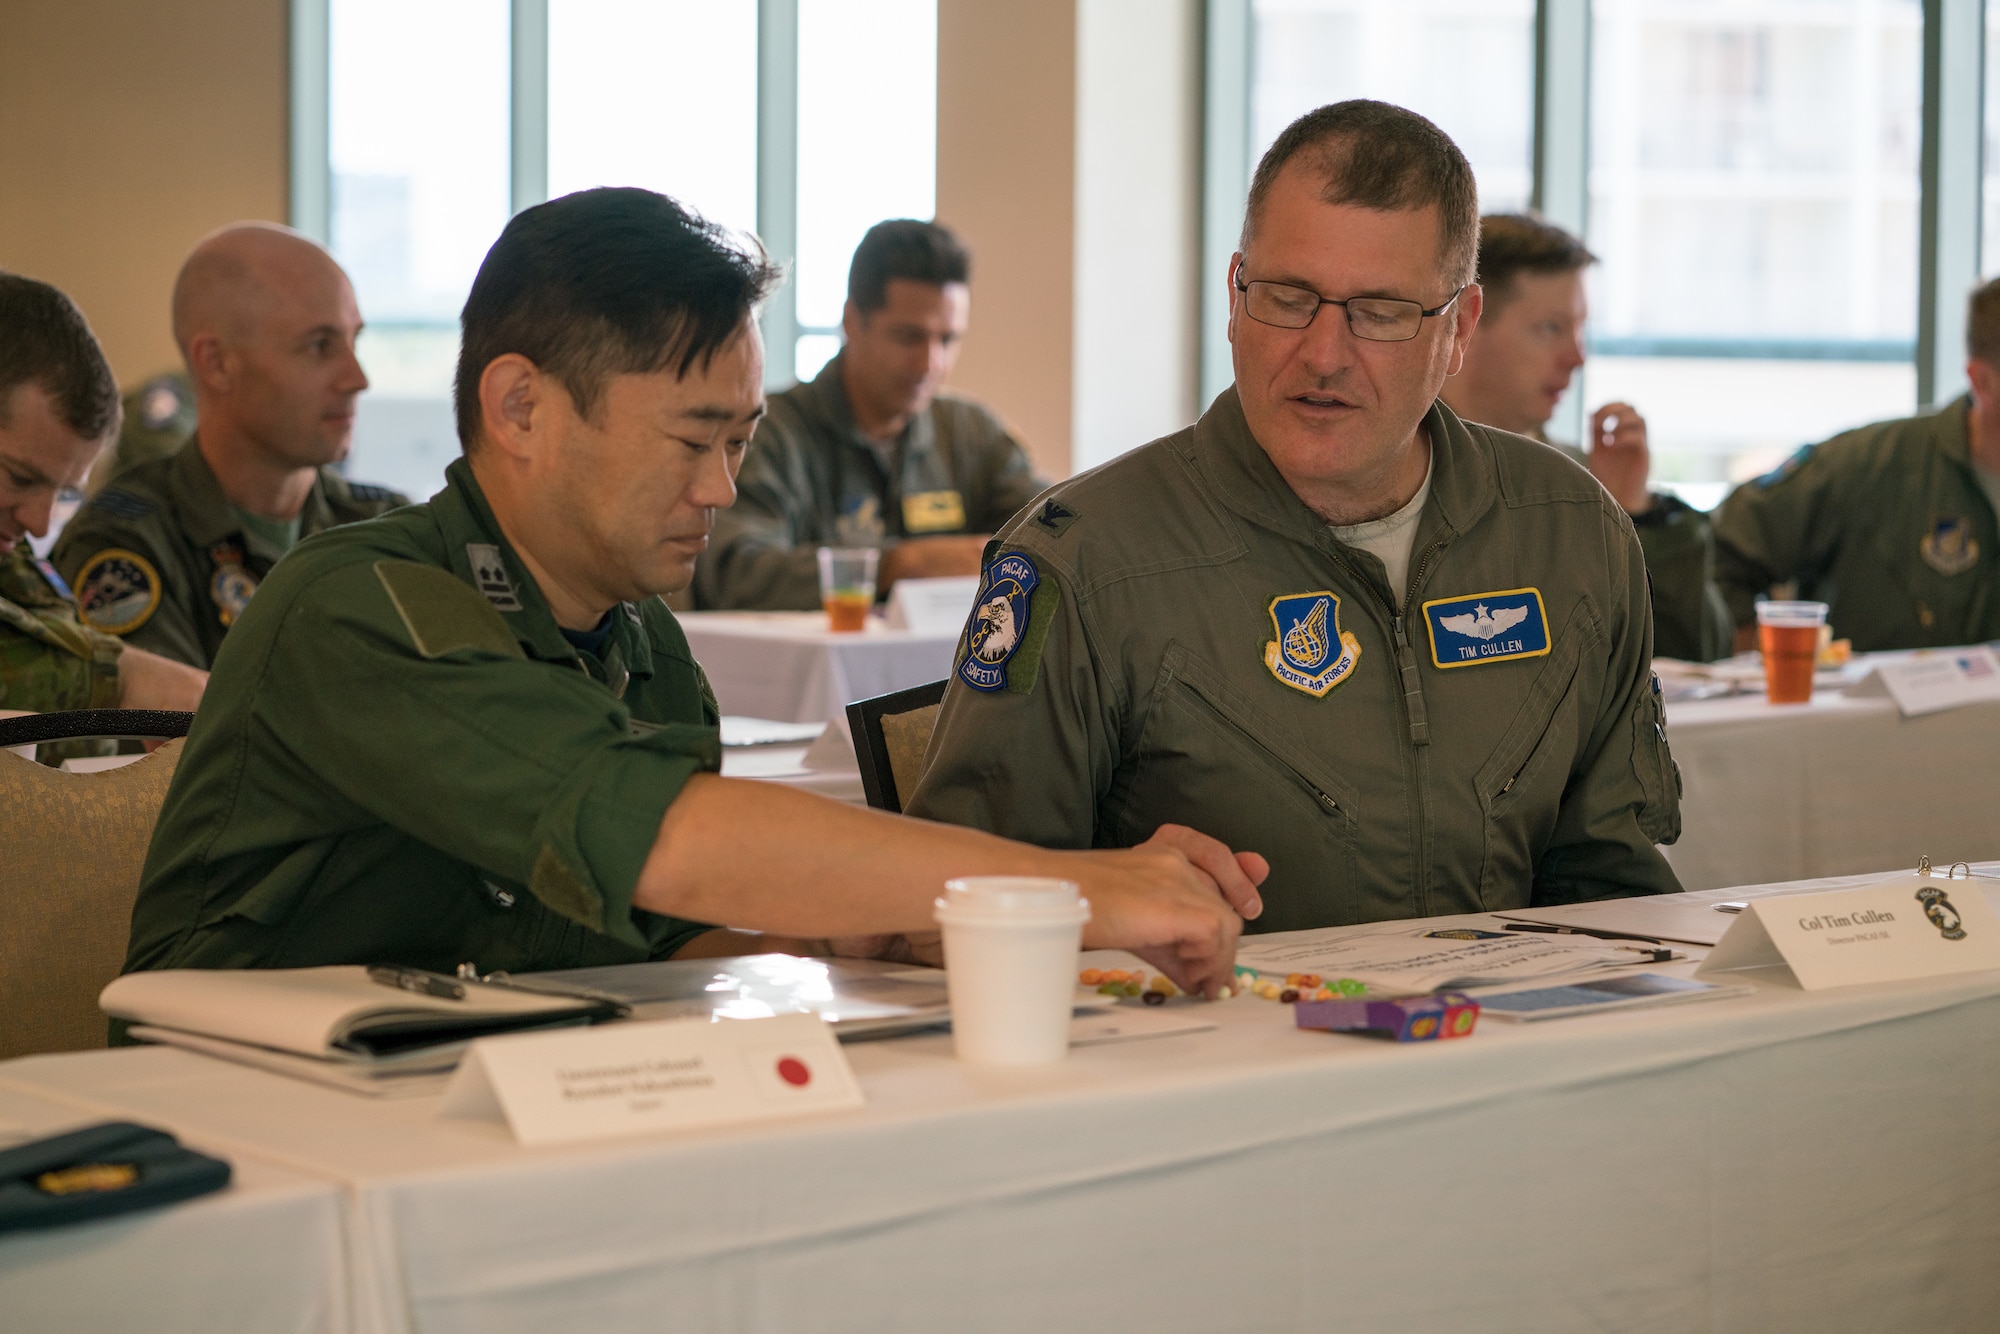 Koku-Jieitai (Japan Air Self-Defense Force) Lt. Col. Ryouhei Nakashima (left) and U.S. Air Force Col. Tim Cullen, Pacific Air Forces director of safety, work together during a group activity as part of the Asia-Pacific Aviation Safety Subject Matter Expert Exchange (APASS) in Honolulu, Hawaii, Aug. 14, 2018. APASS allows partner nations in the Indo-Pacific to discuss aviation safety practices and devise solutions to challenges faced by the various air forces. (U.S. Air Force photo by Staff Sgt. Daniel Robles)